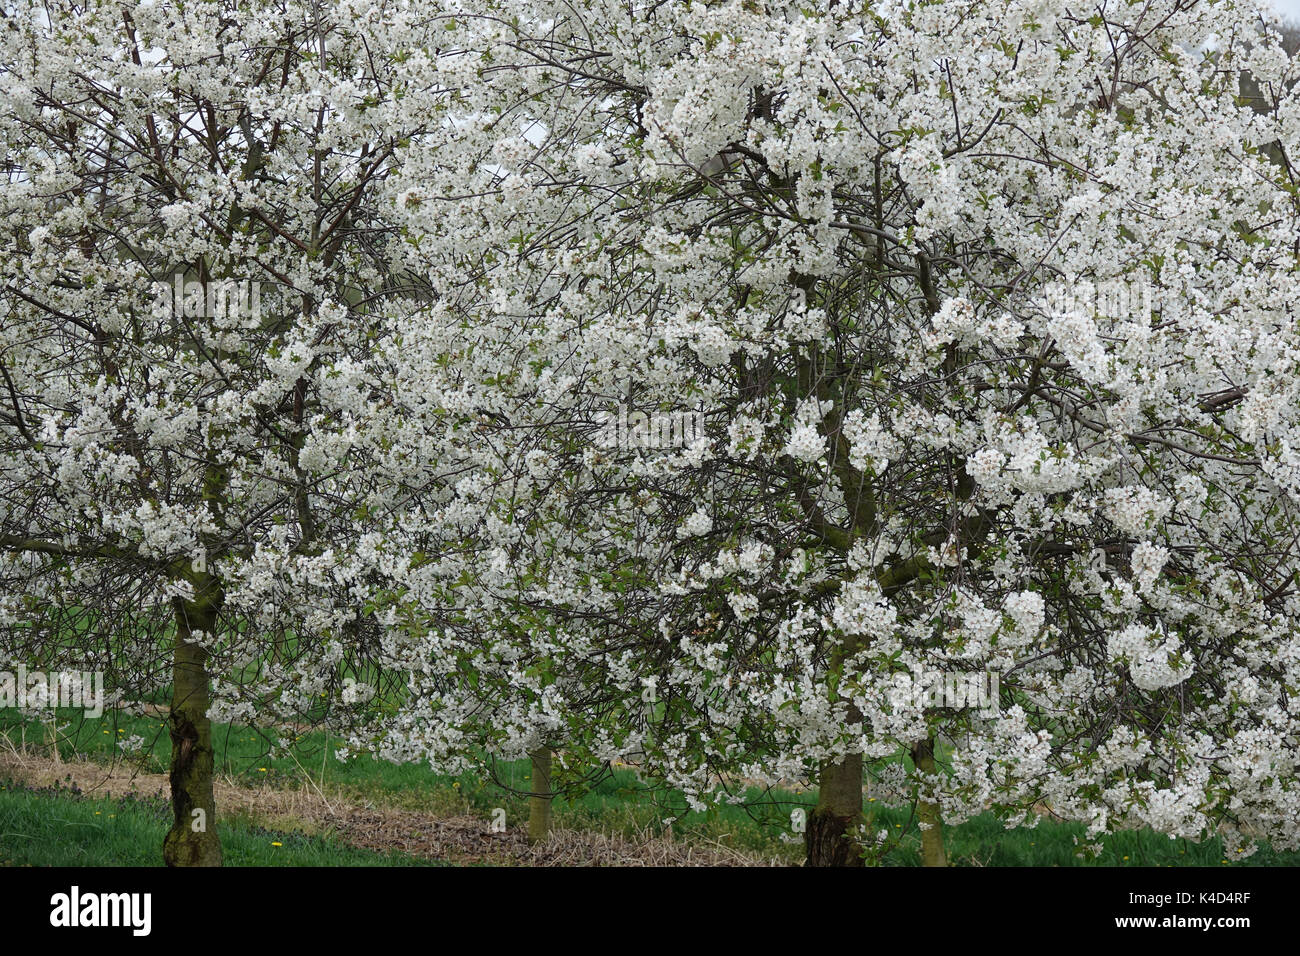 Blooming Cherry Trees, Morello Cherry Blossoms Stock Photo